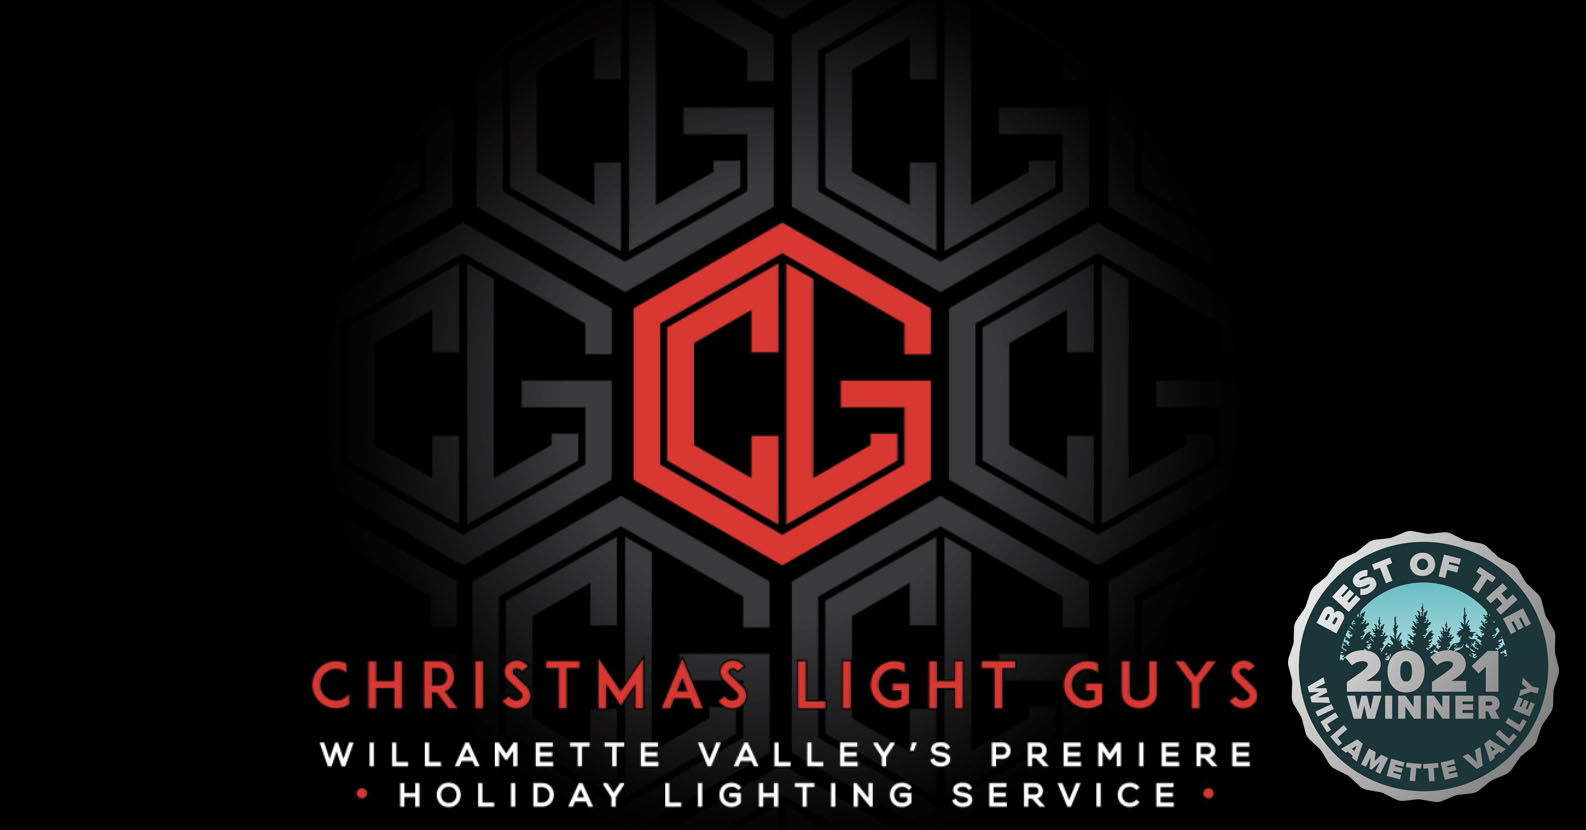 The Christmas Light Guys - Commercial and Estate Properties Holiday Lighting